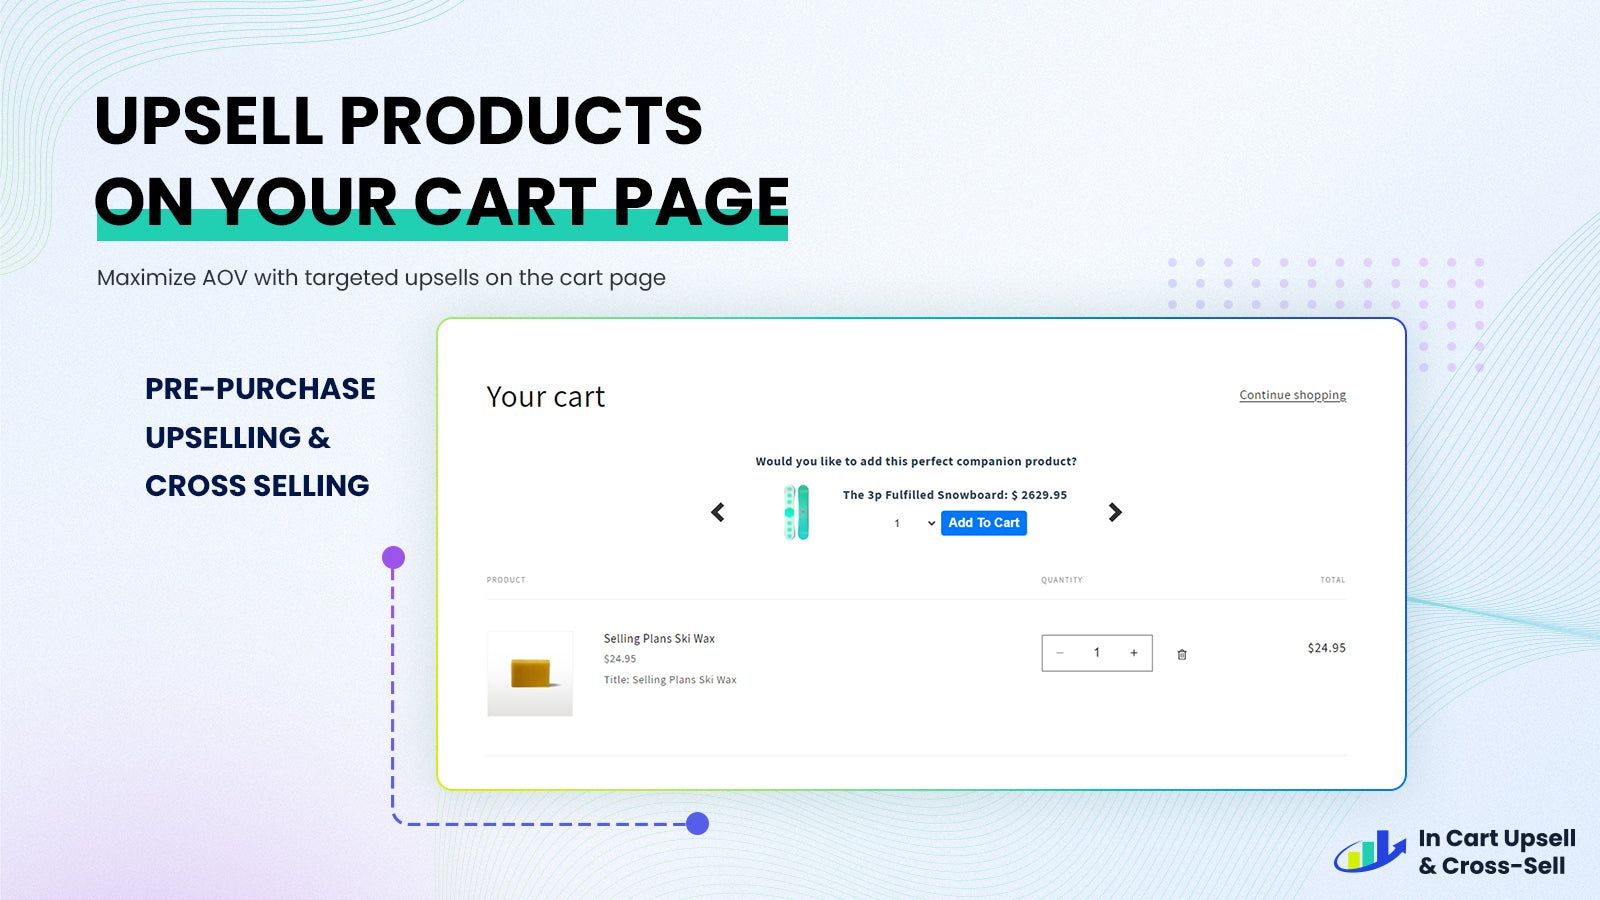 Offer upsells & cross sells on the cart page